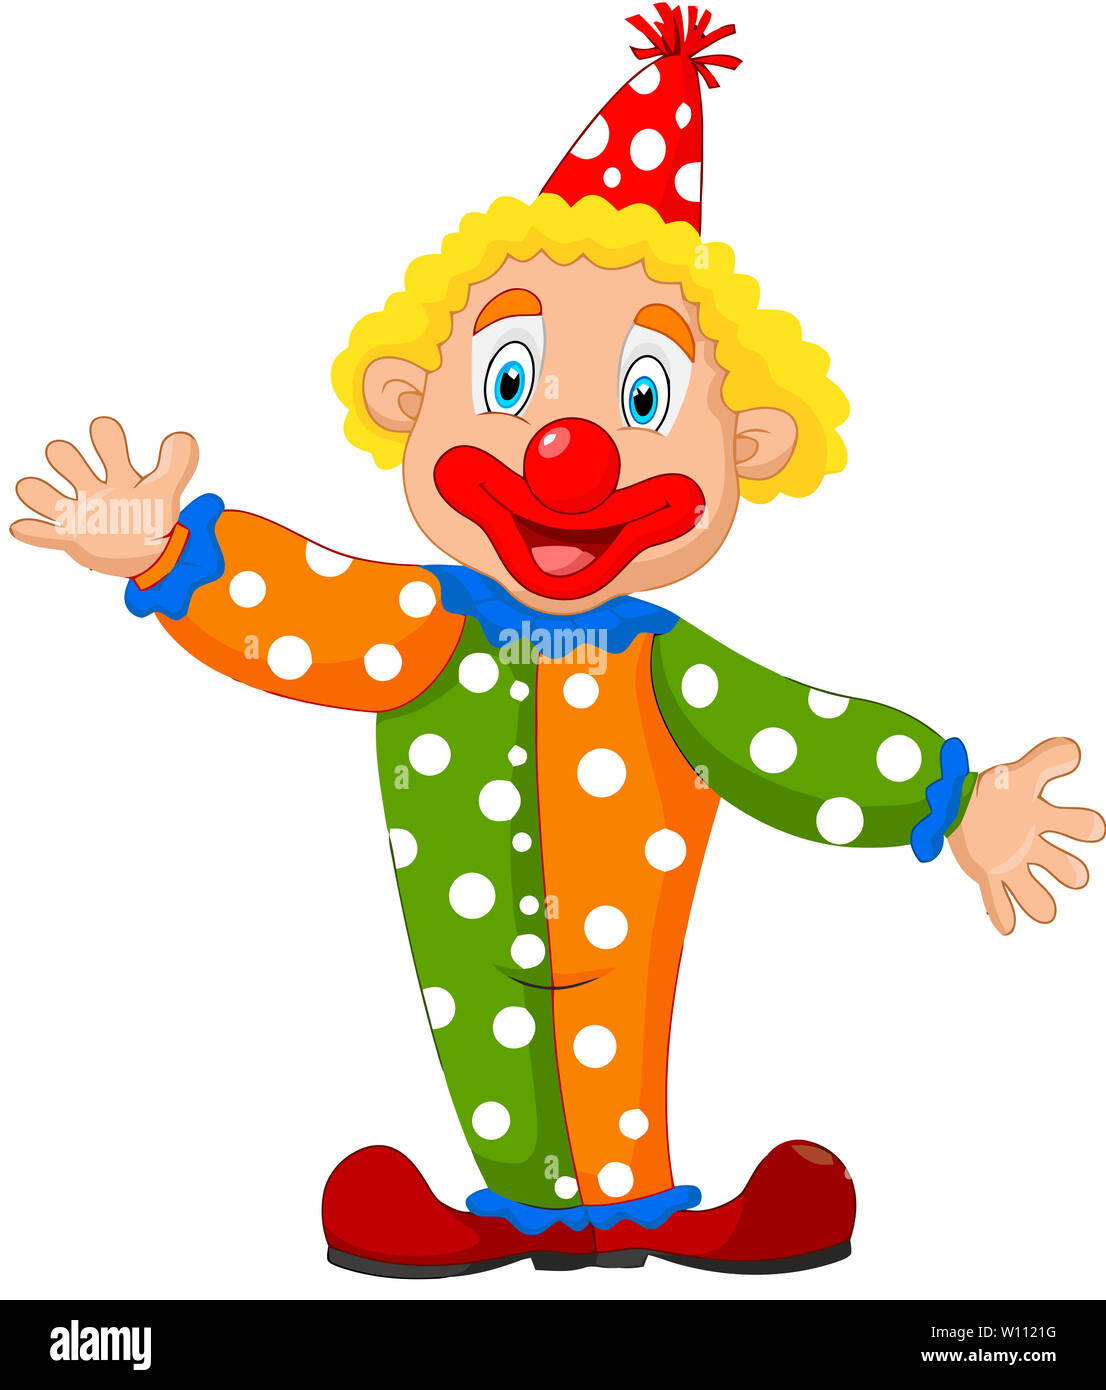 clown circus show stage costume party joker illustration Stock Photo